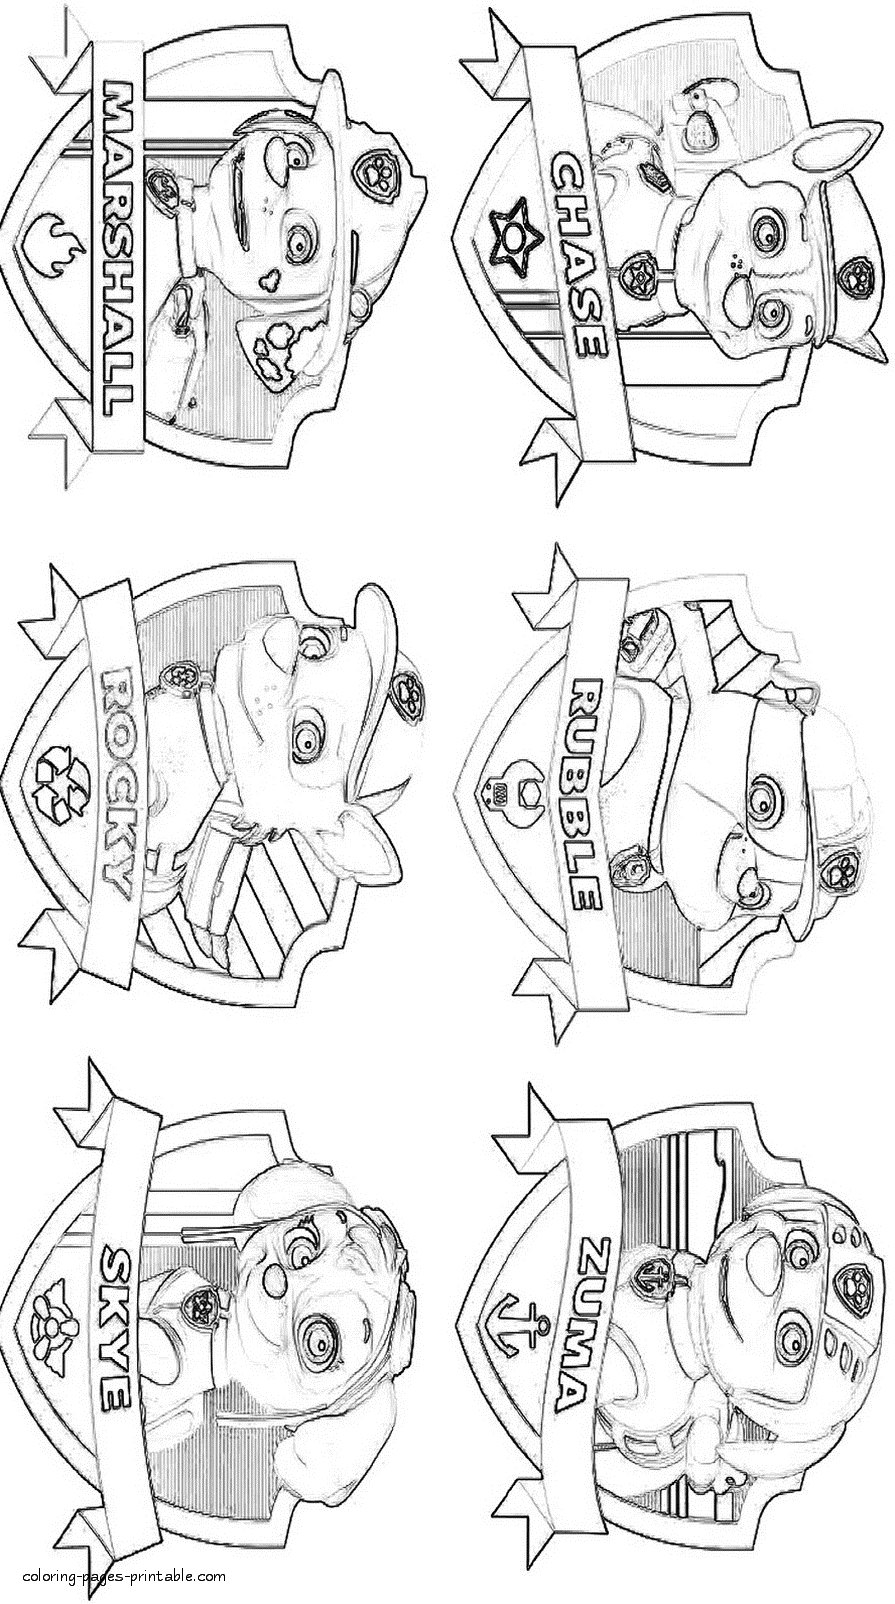 printable-paw-patrol-coloring-pages